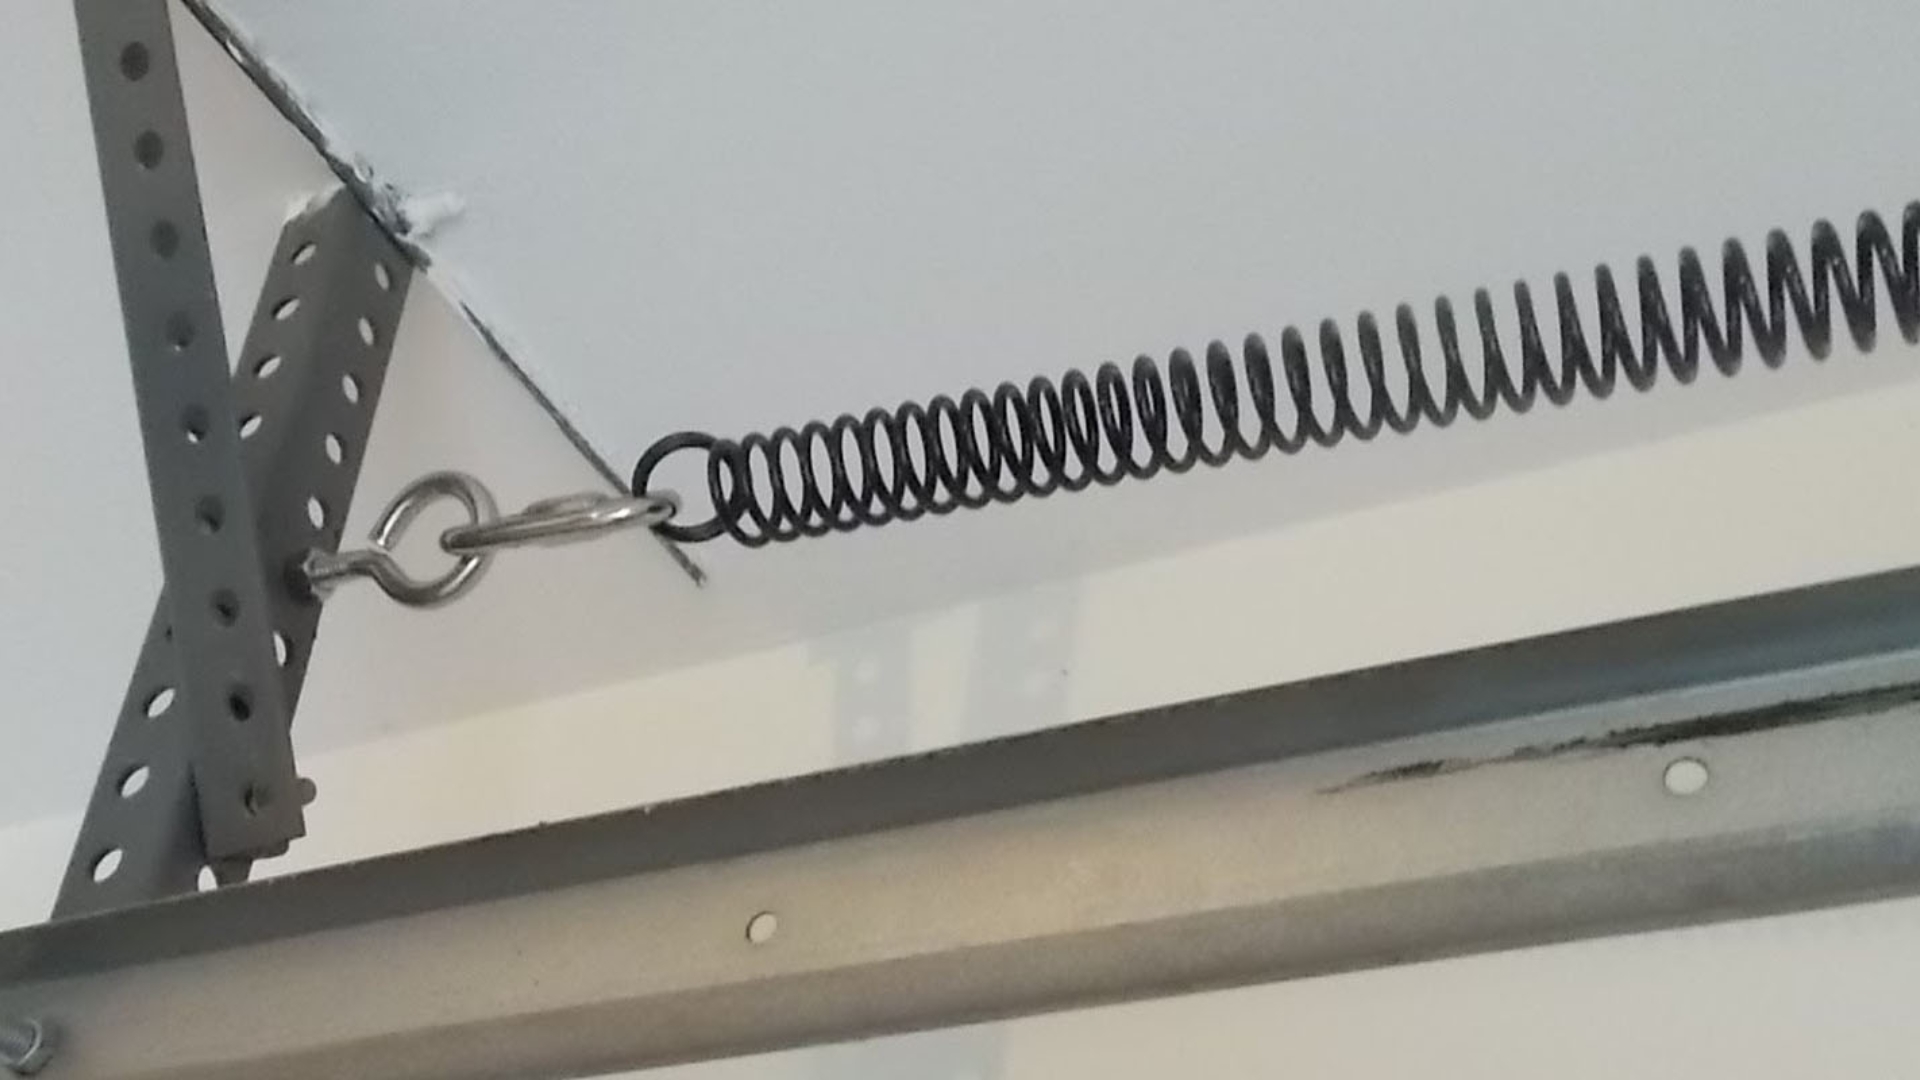 A garage door extension spring being stretched out